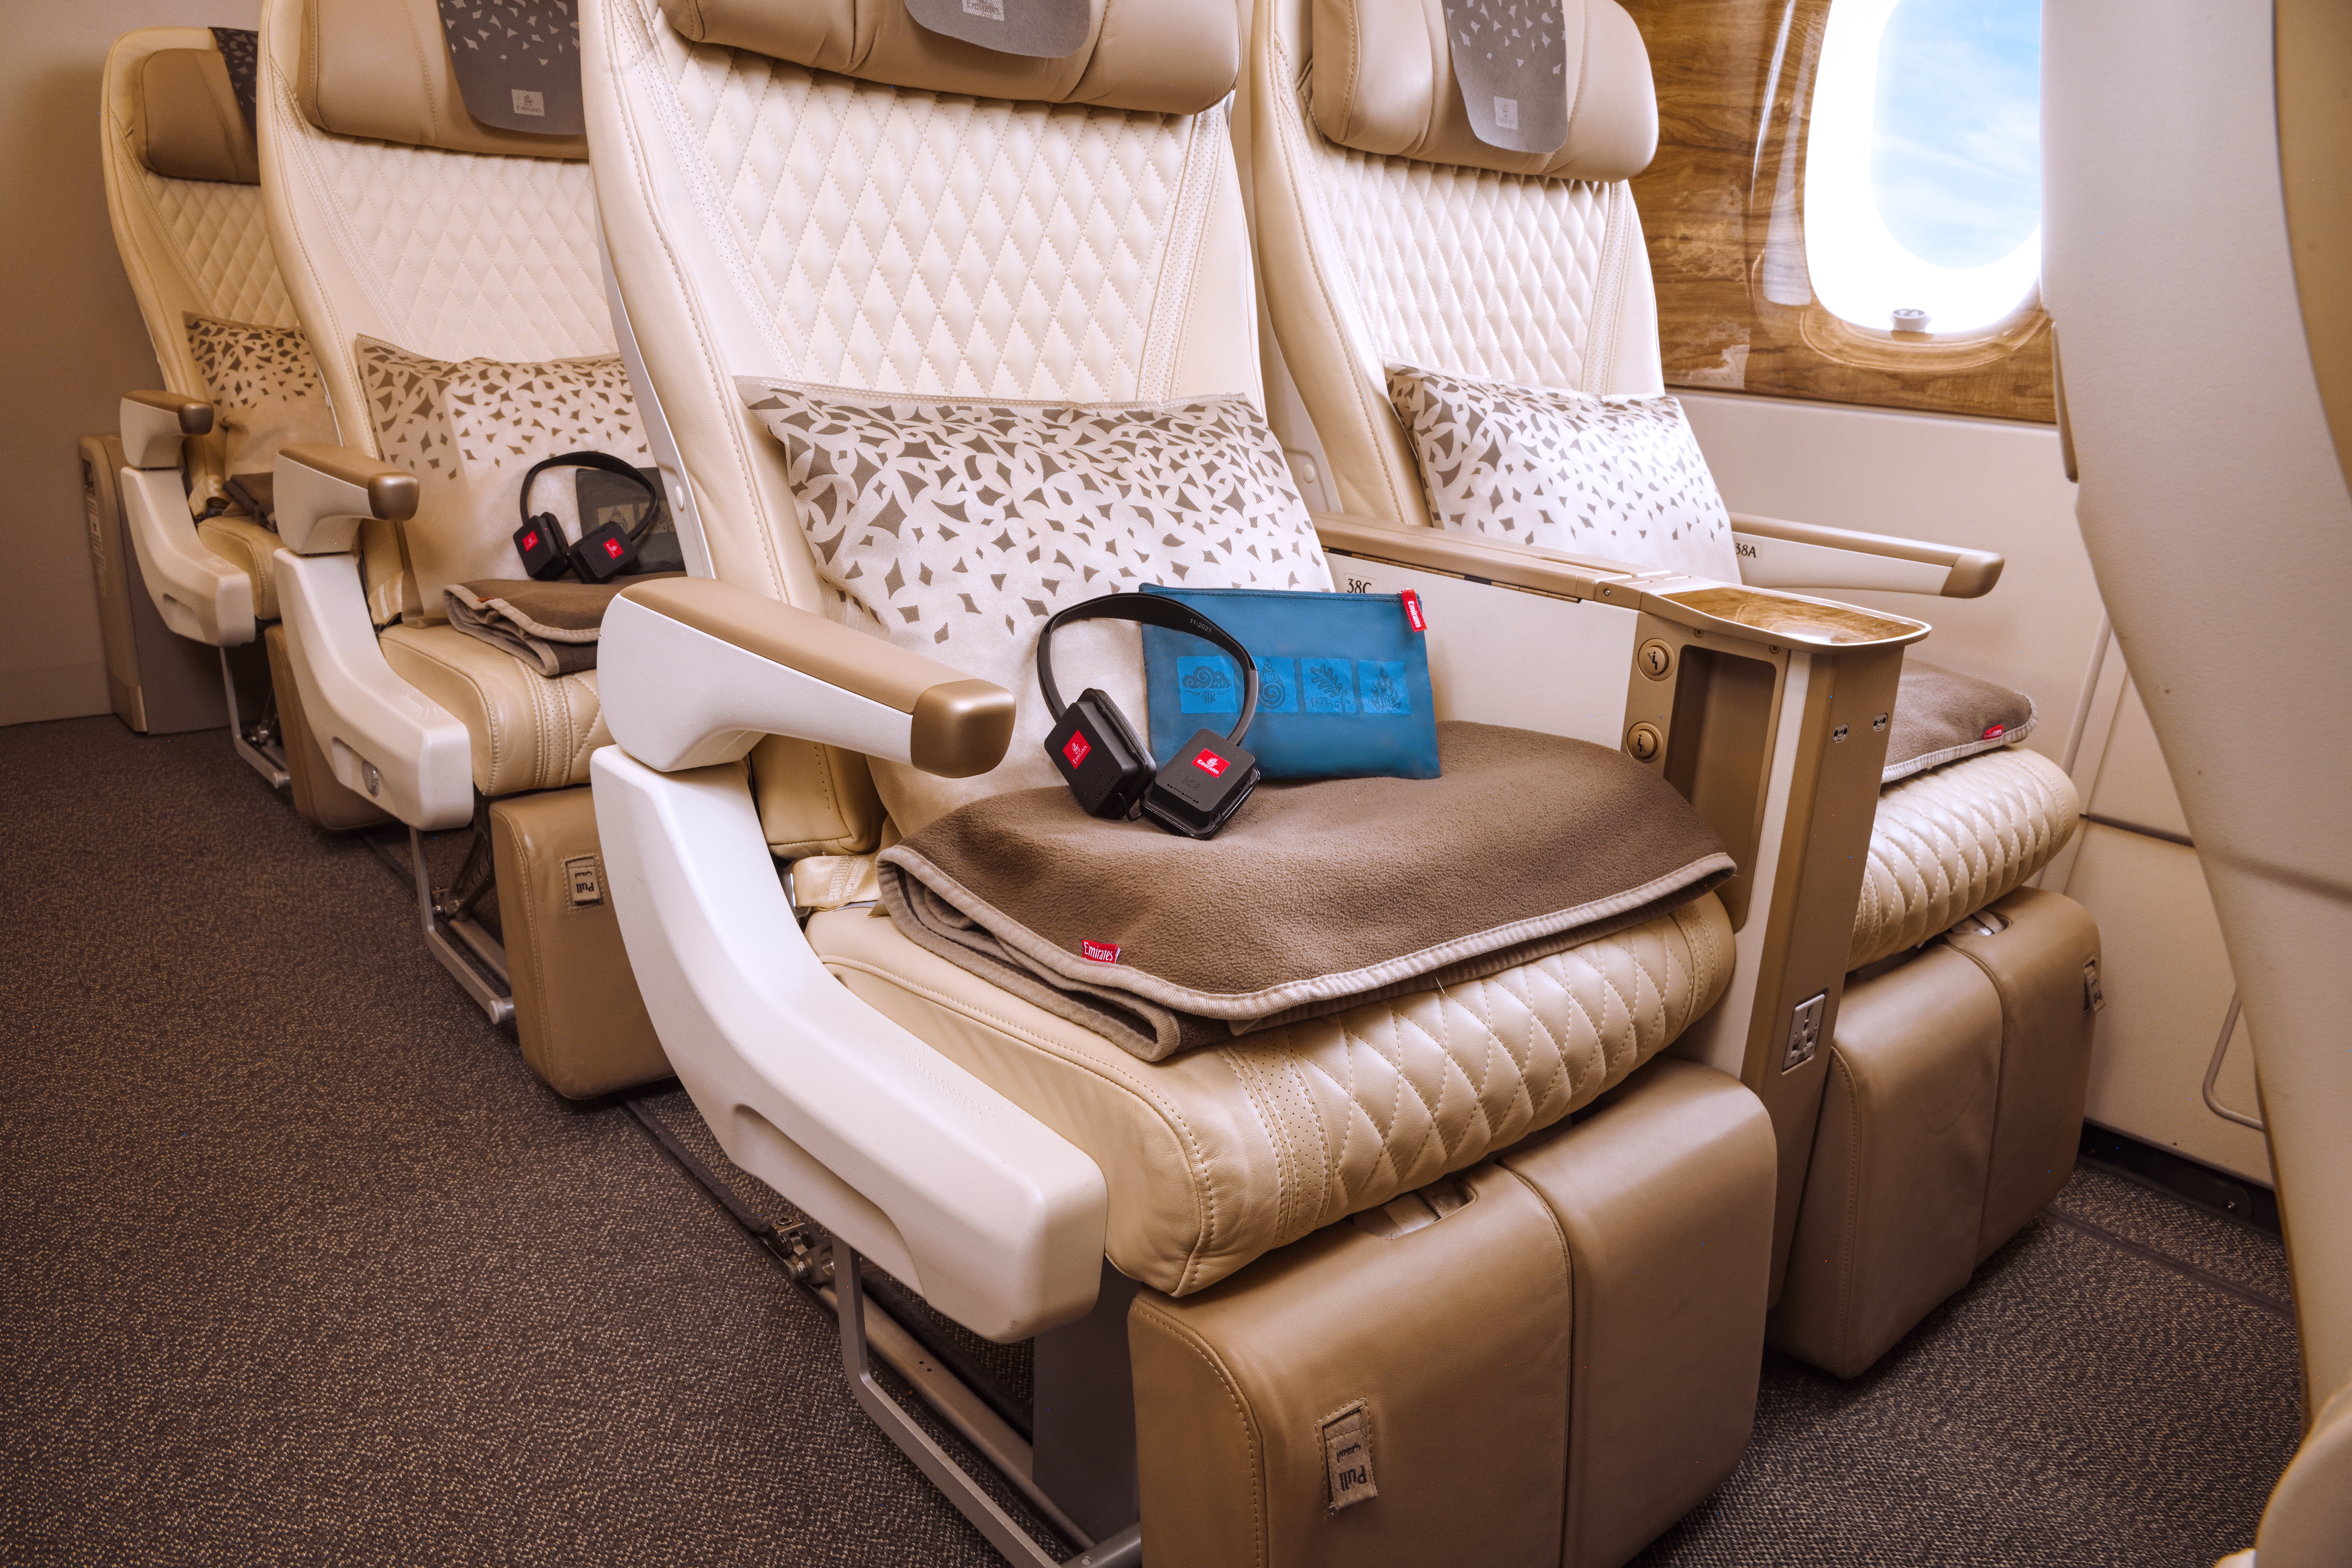 Emirates has this week marked one year of Premium Economy flights being offer in Singapore.